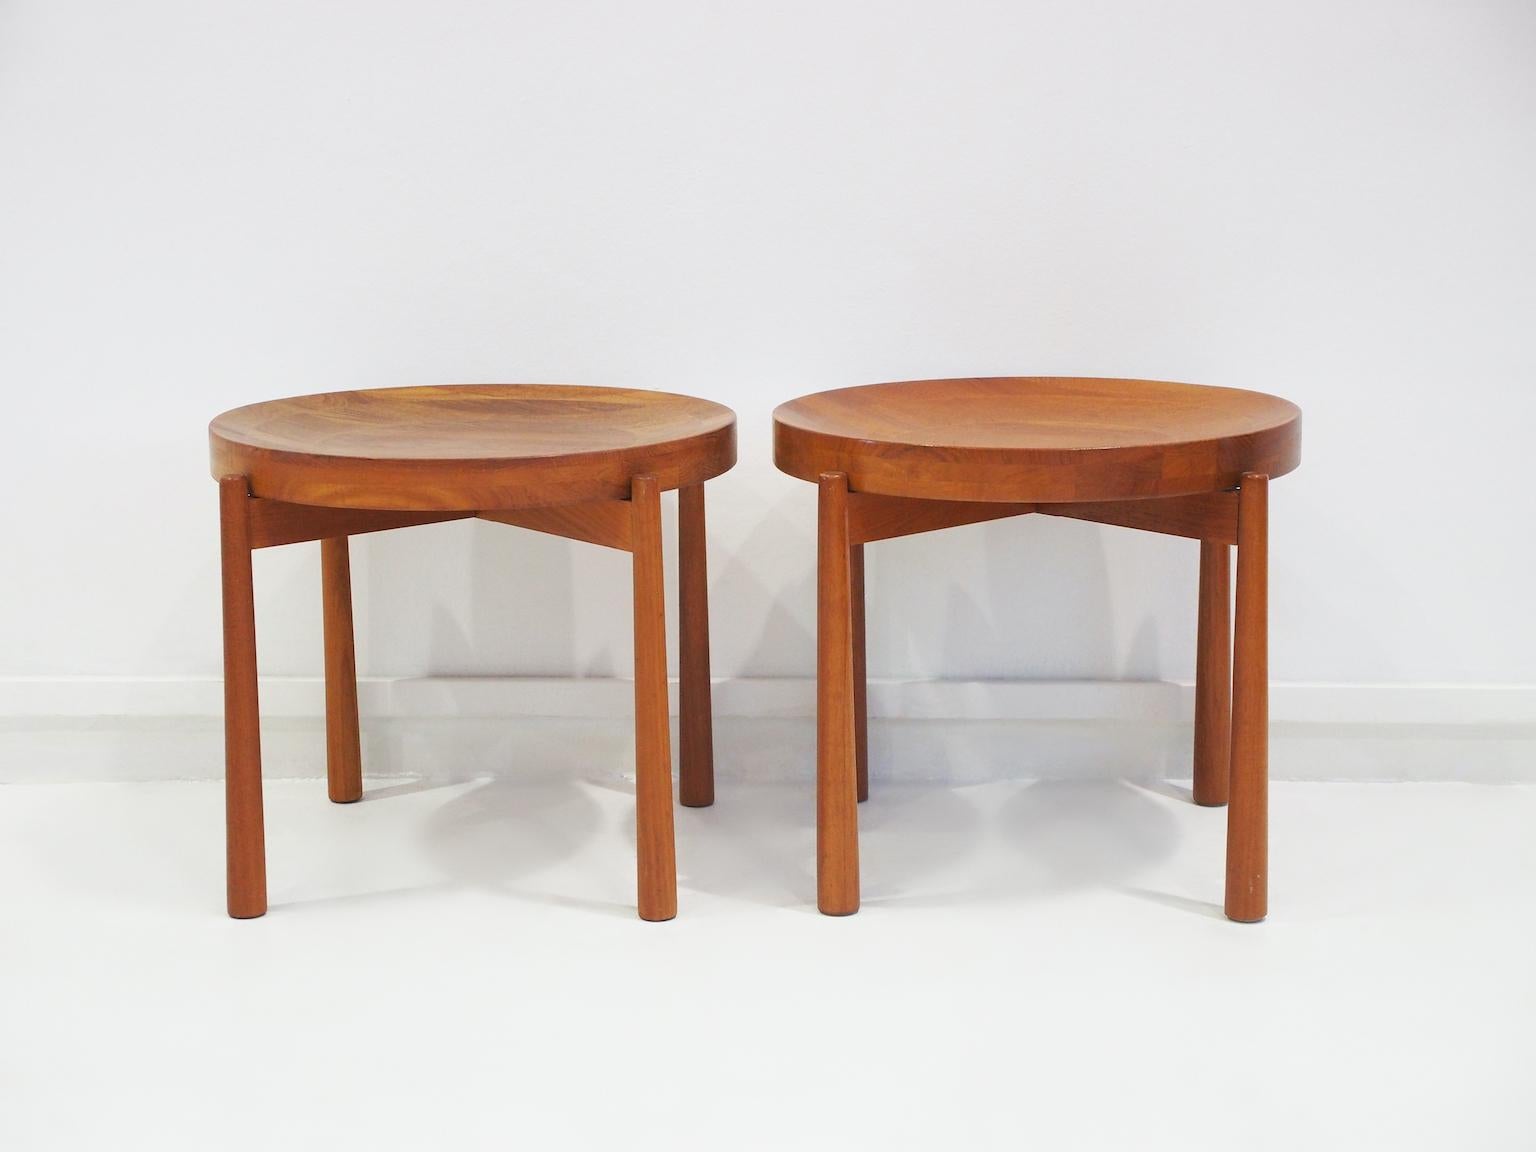 Pair of round teak side tables with reversible top that can be used alone as a fruit bowl or as a table when the other flat side is up. Danish design attributed to Jens Harald Quistgaard.